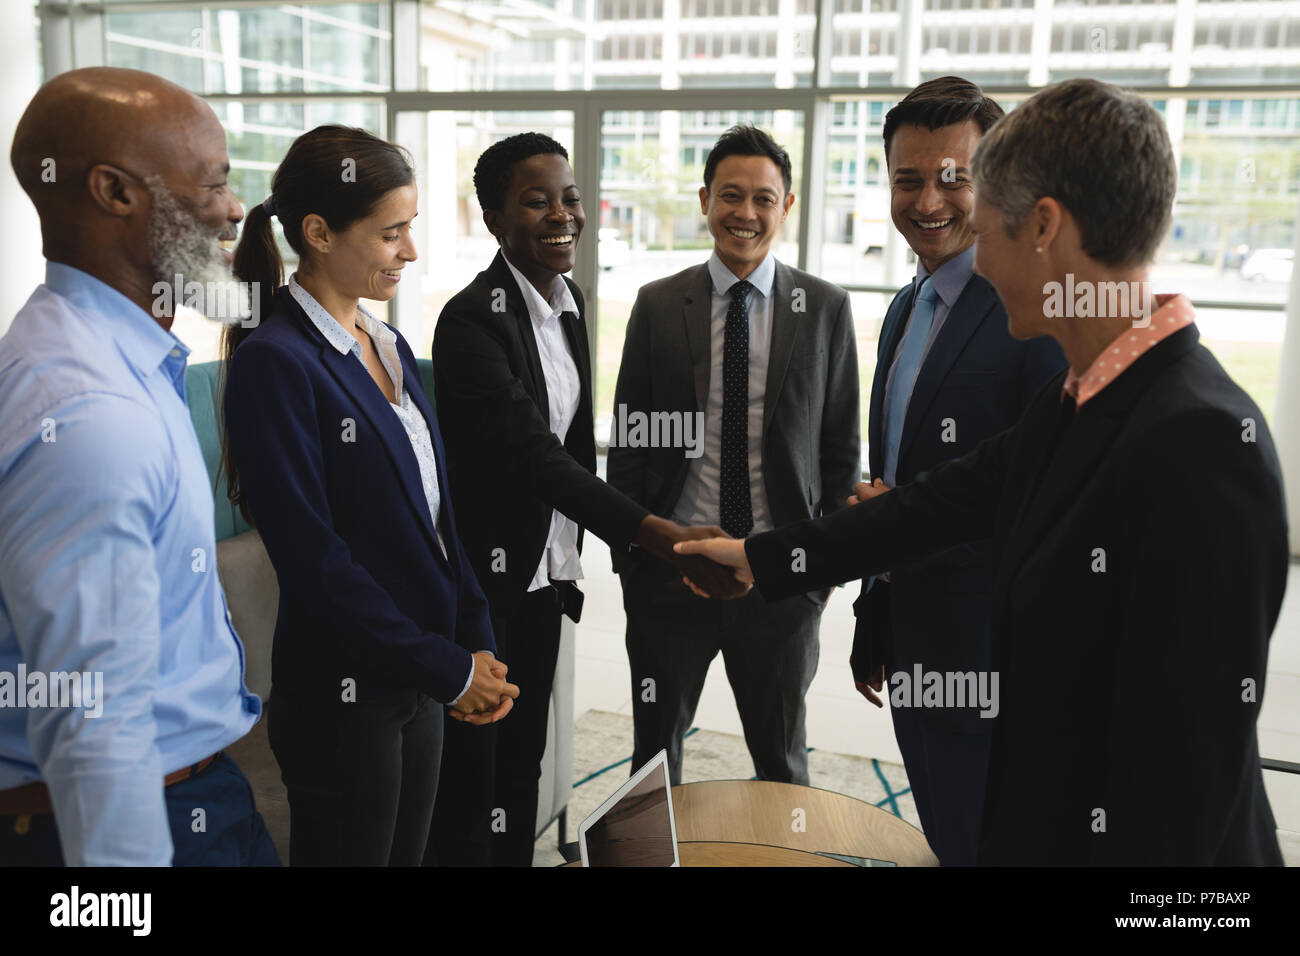 Businesspeople shaking hands in the office Stock Photo